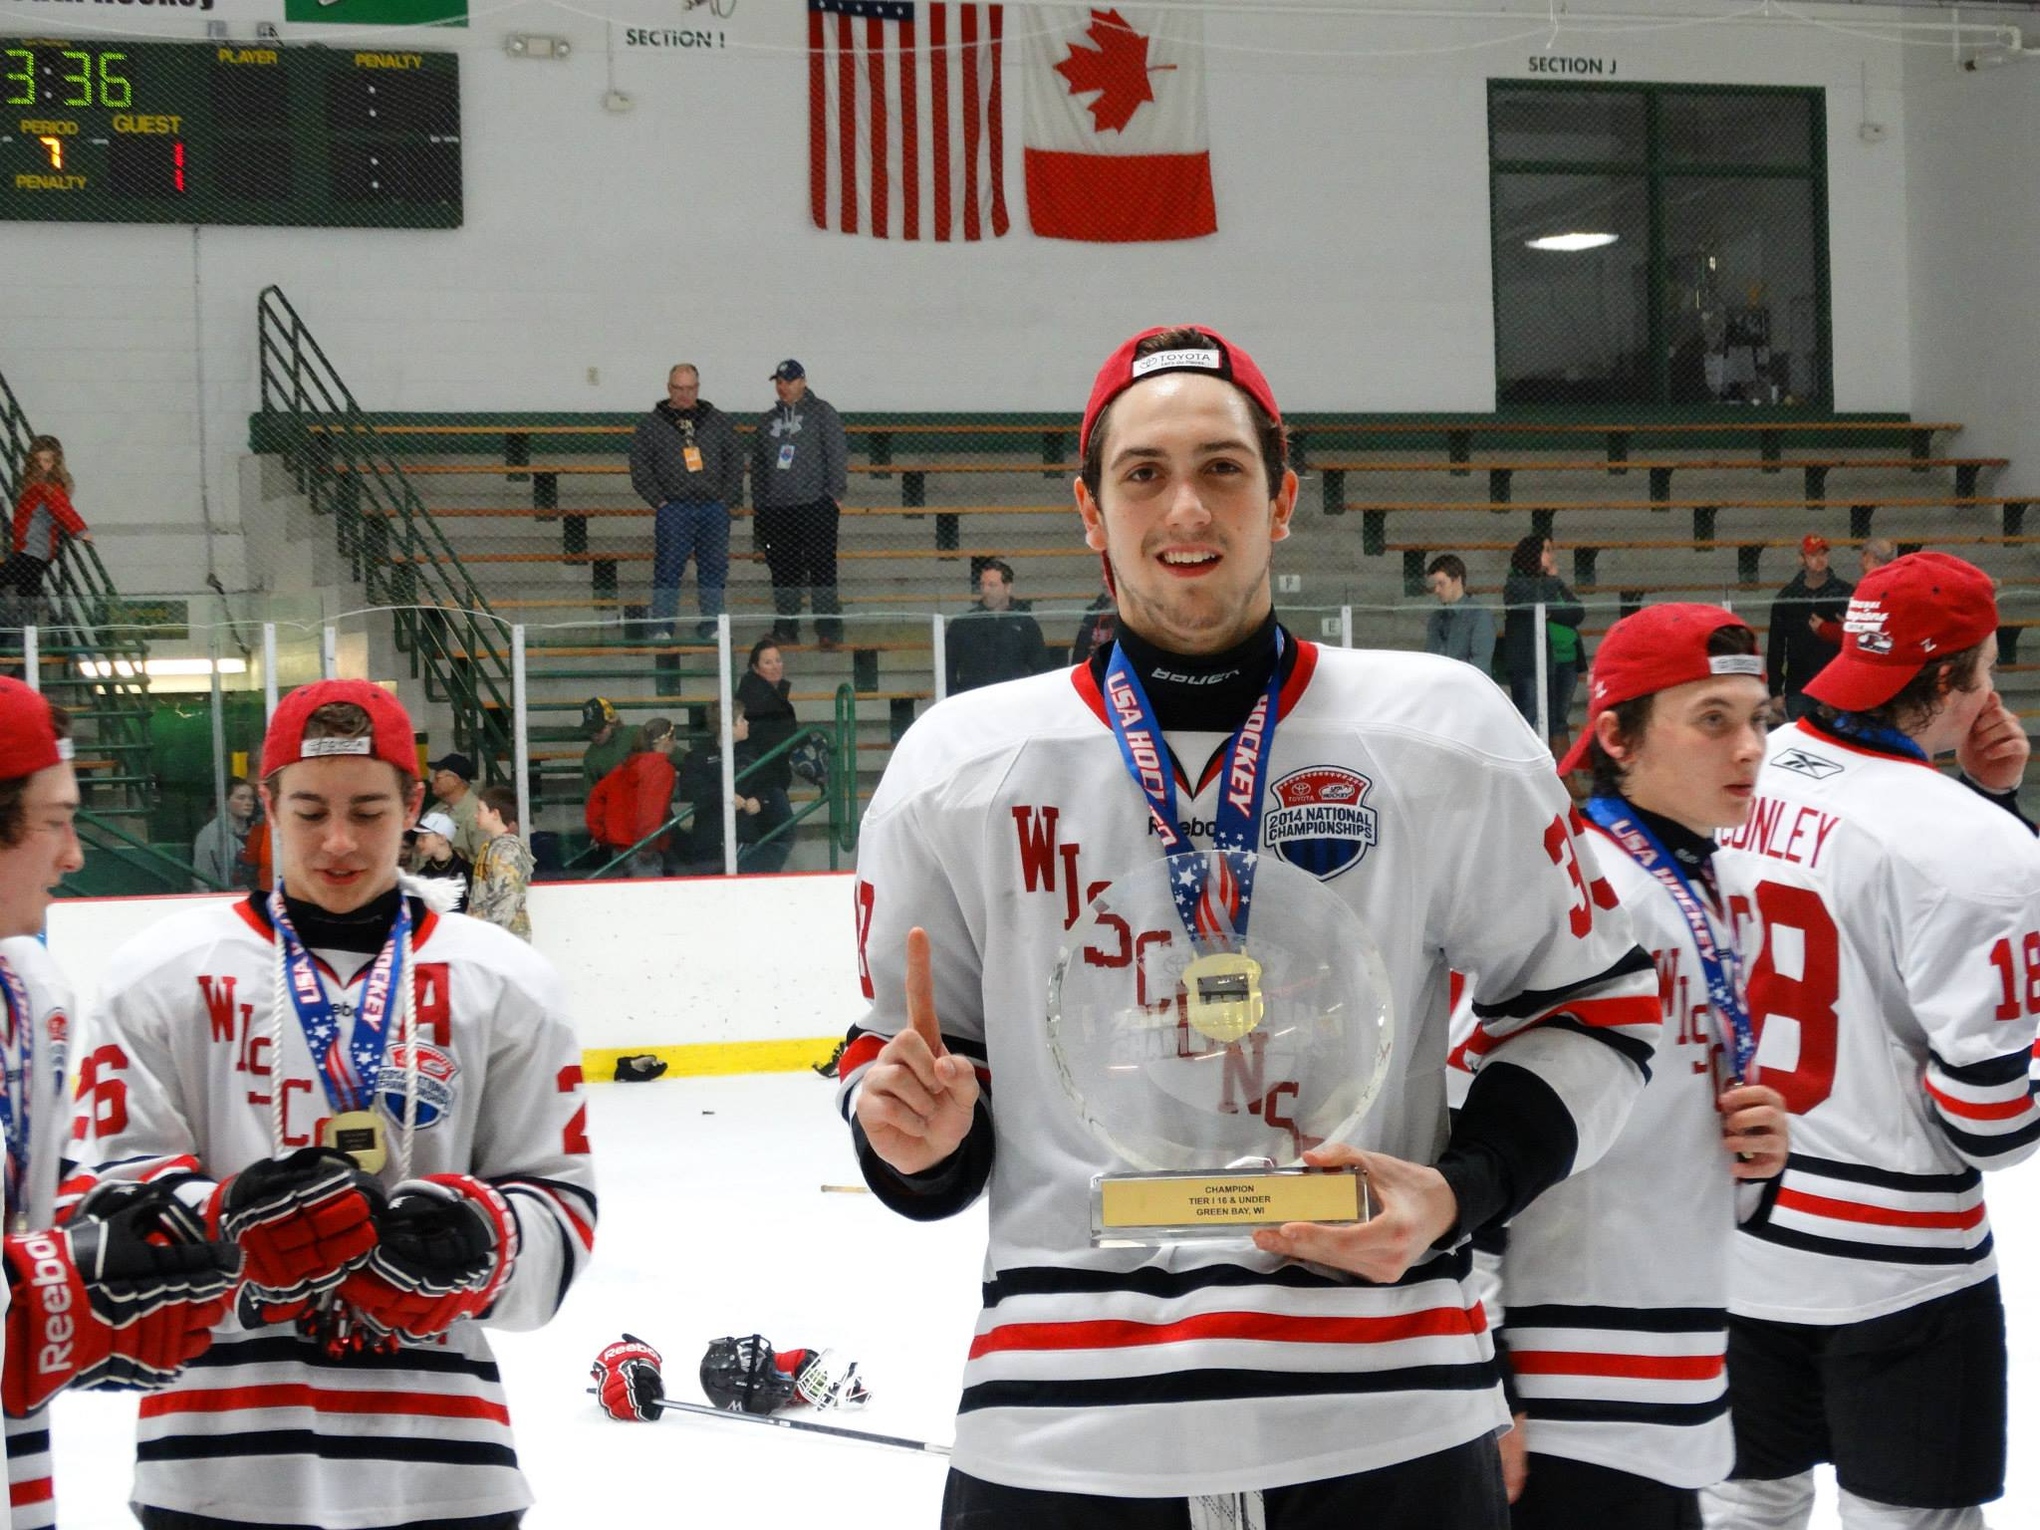 Adam Parsells poses after winning the USA Hockey Tier 1 national championship with Team Wisconsin.